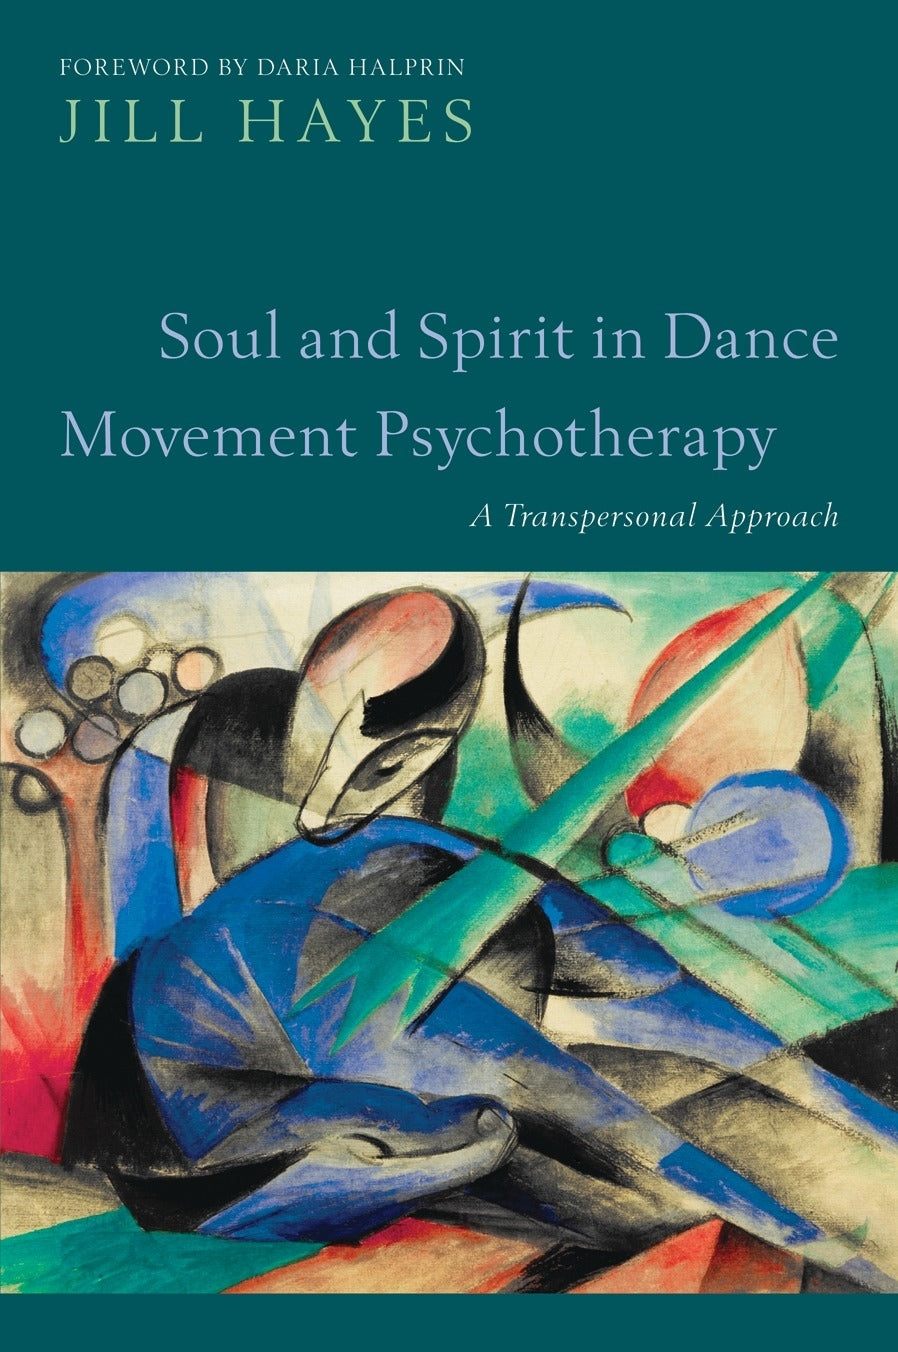 Soul and Spirit in Dance Movement Psychotherapy by Jill Hayes, Daria Halprin